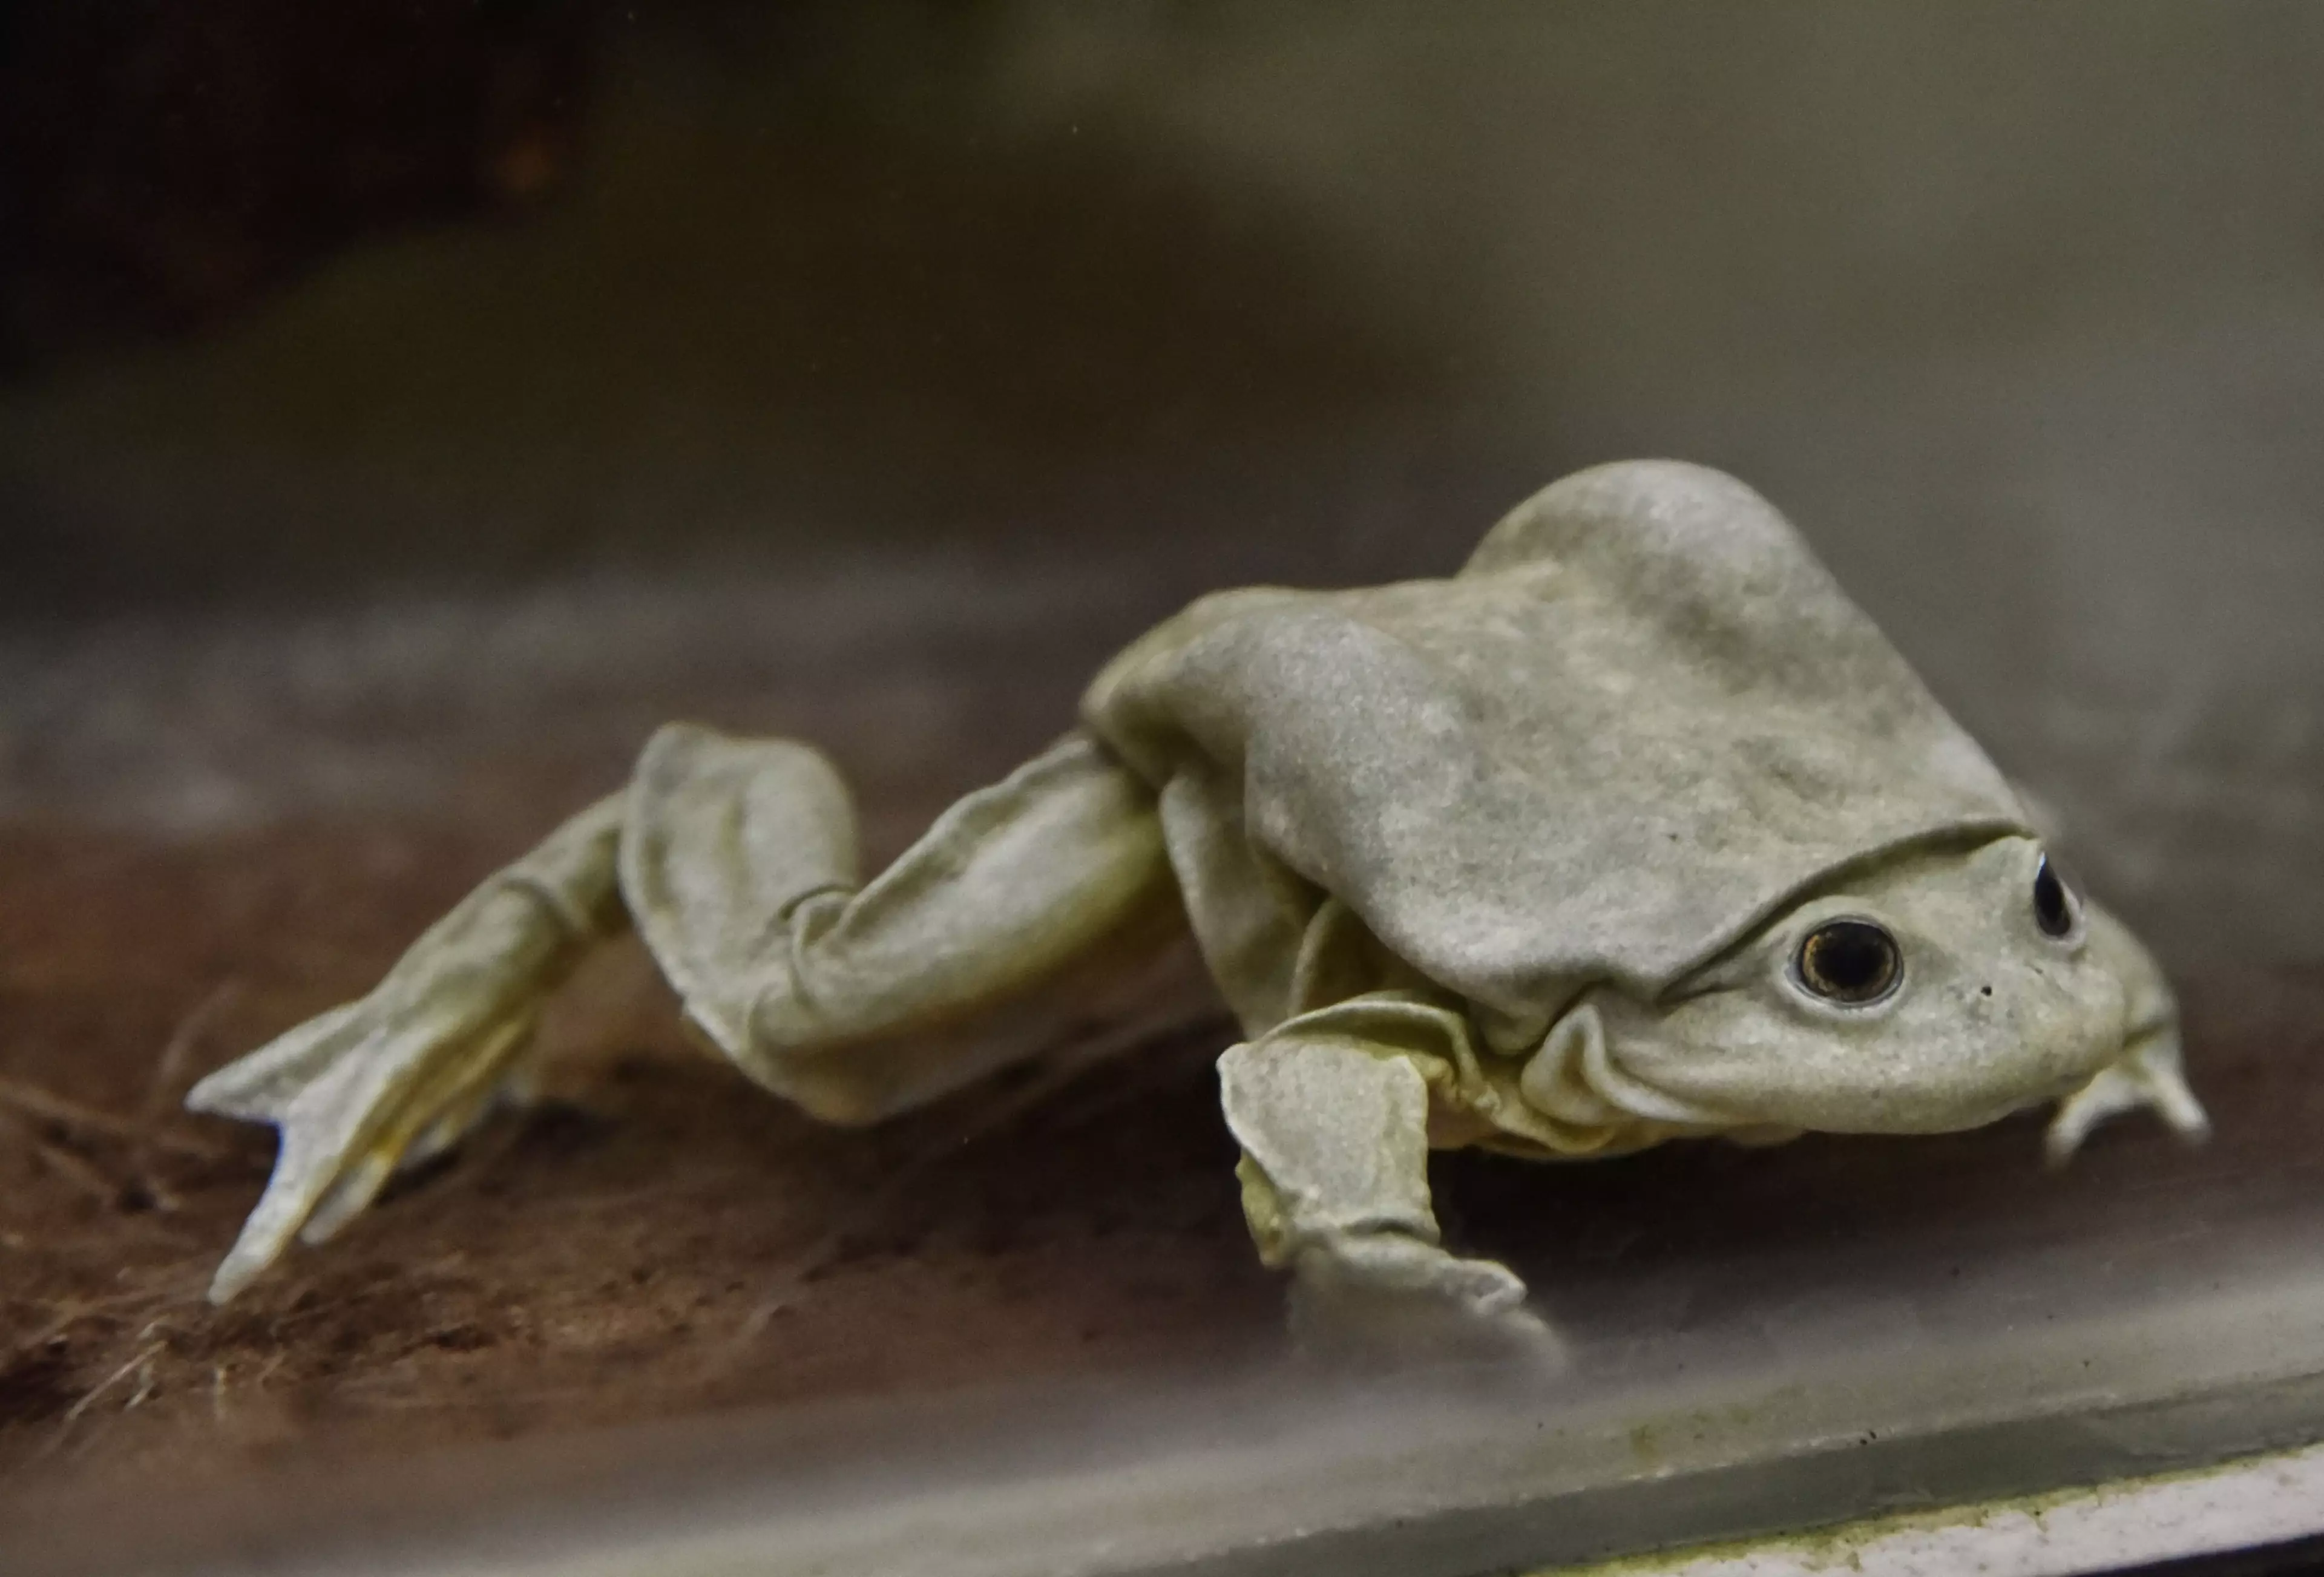 No, your eyes aren't deceiving you - that is a frog.